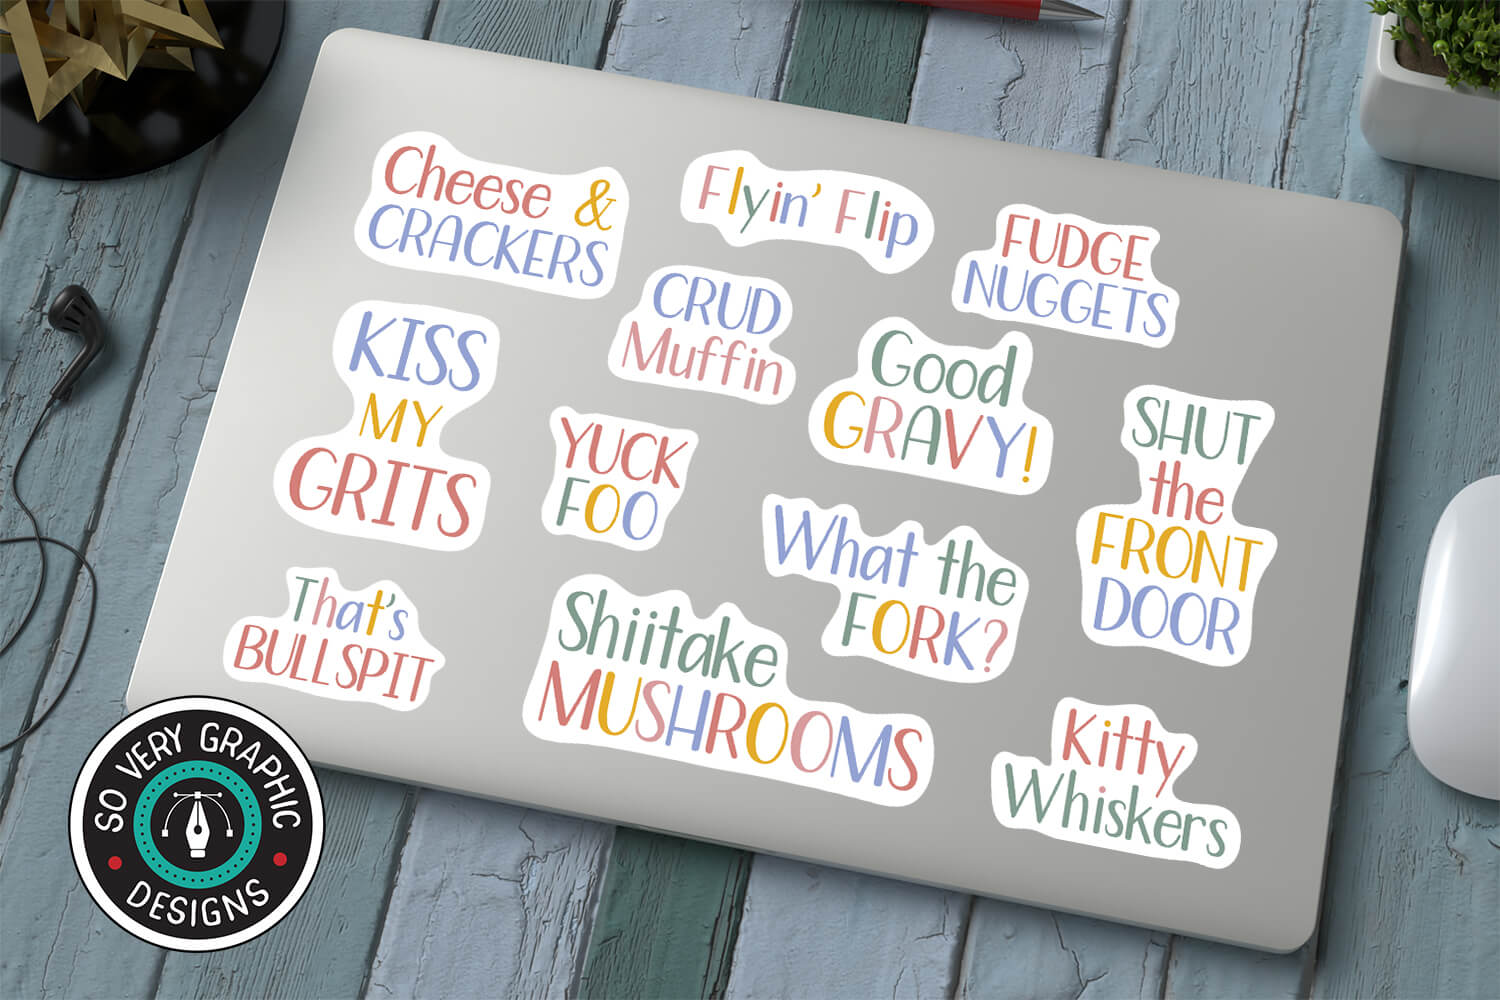 Alternative Swear Words Print & Cut Stickers that are compatible with Cricut from So Very Graphic Designs